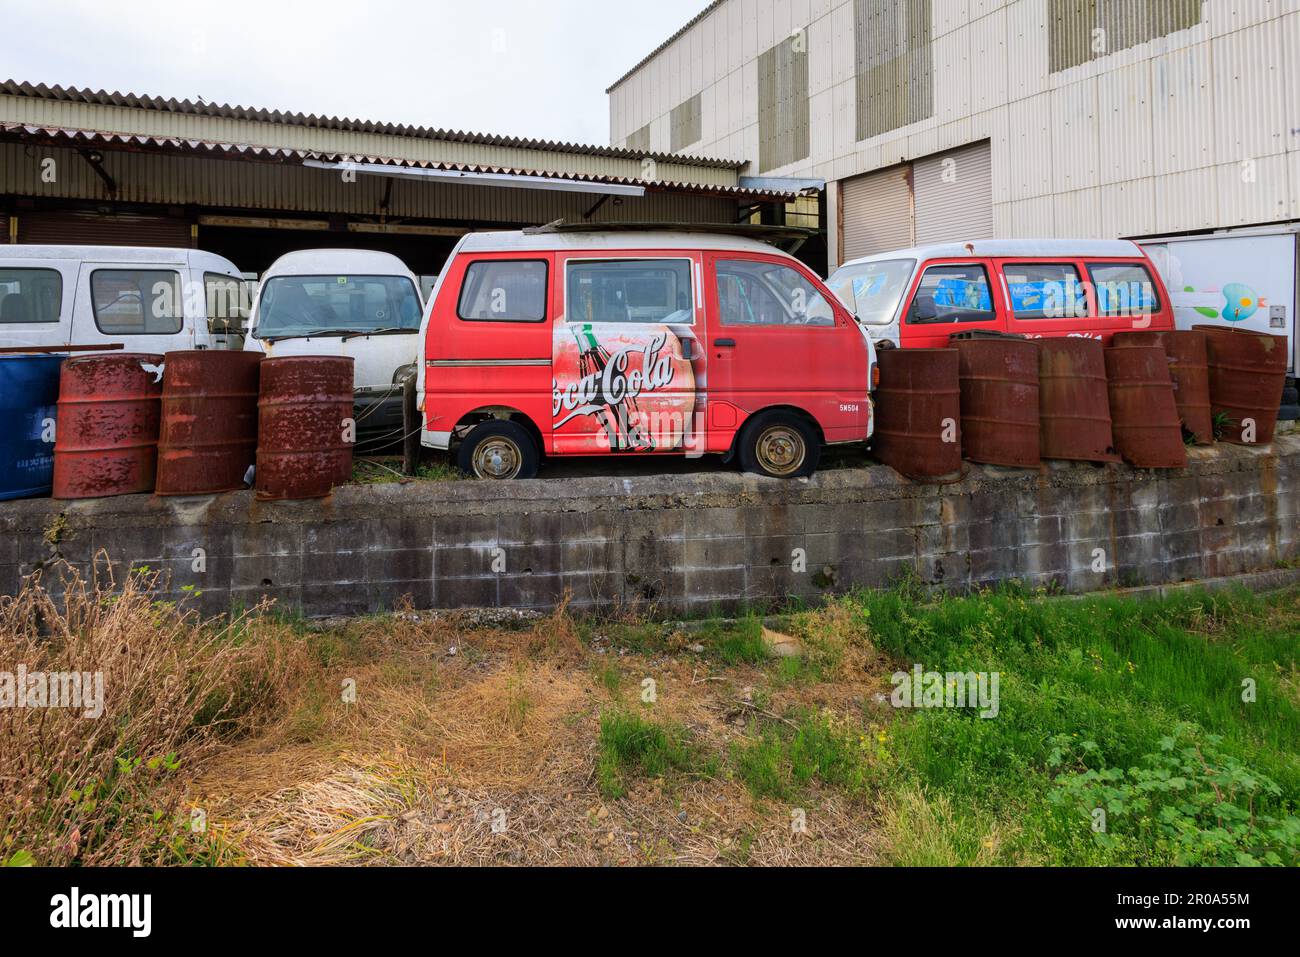 Okubo, Japan - May 6, 2023: Vintage red kei van painted with Coca Cola logo by rusted barrels Stock Photo